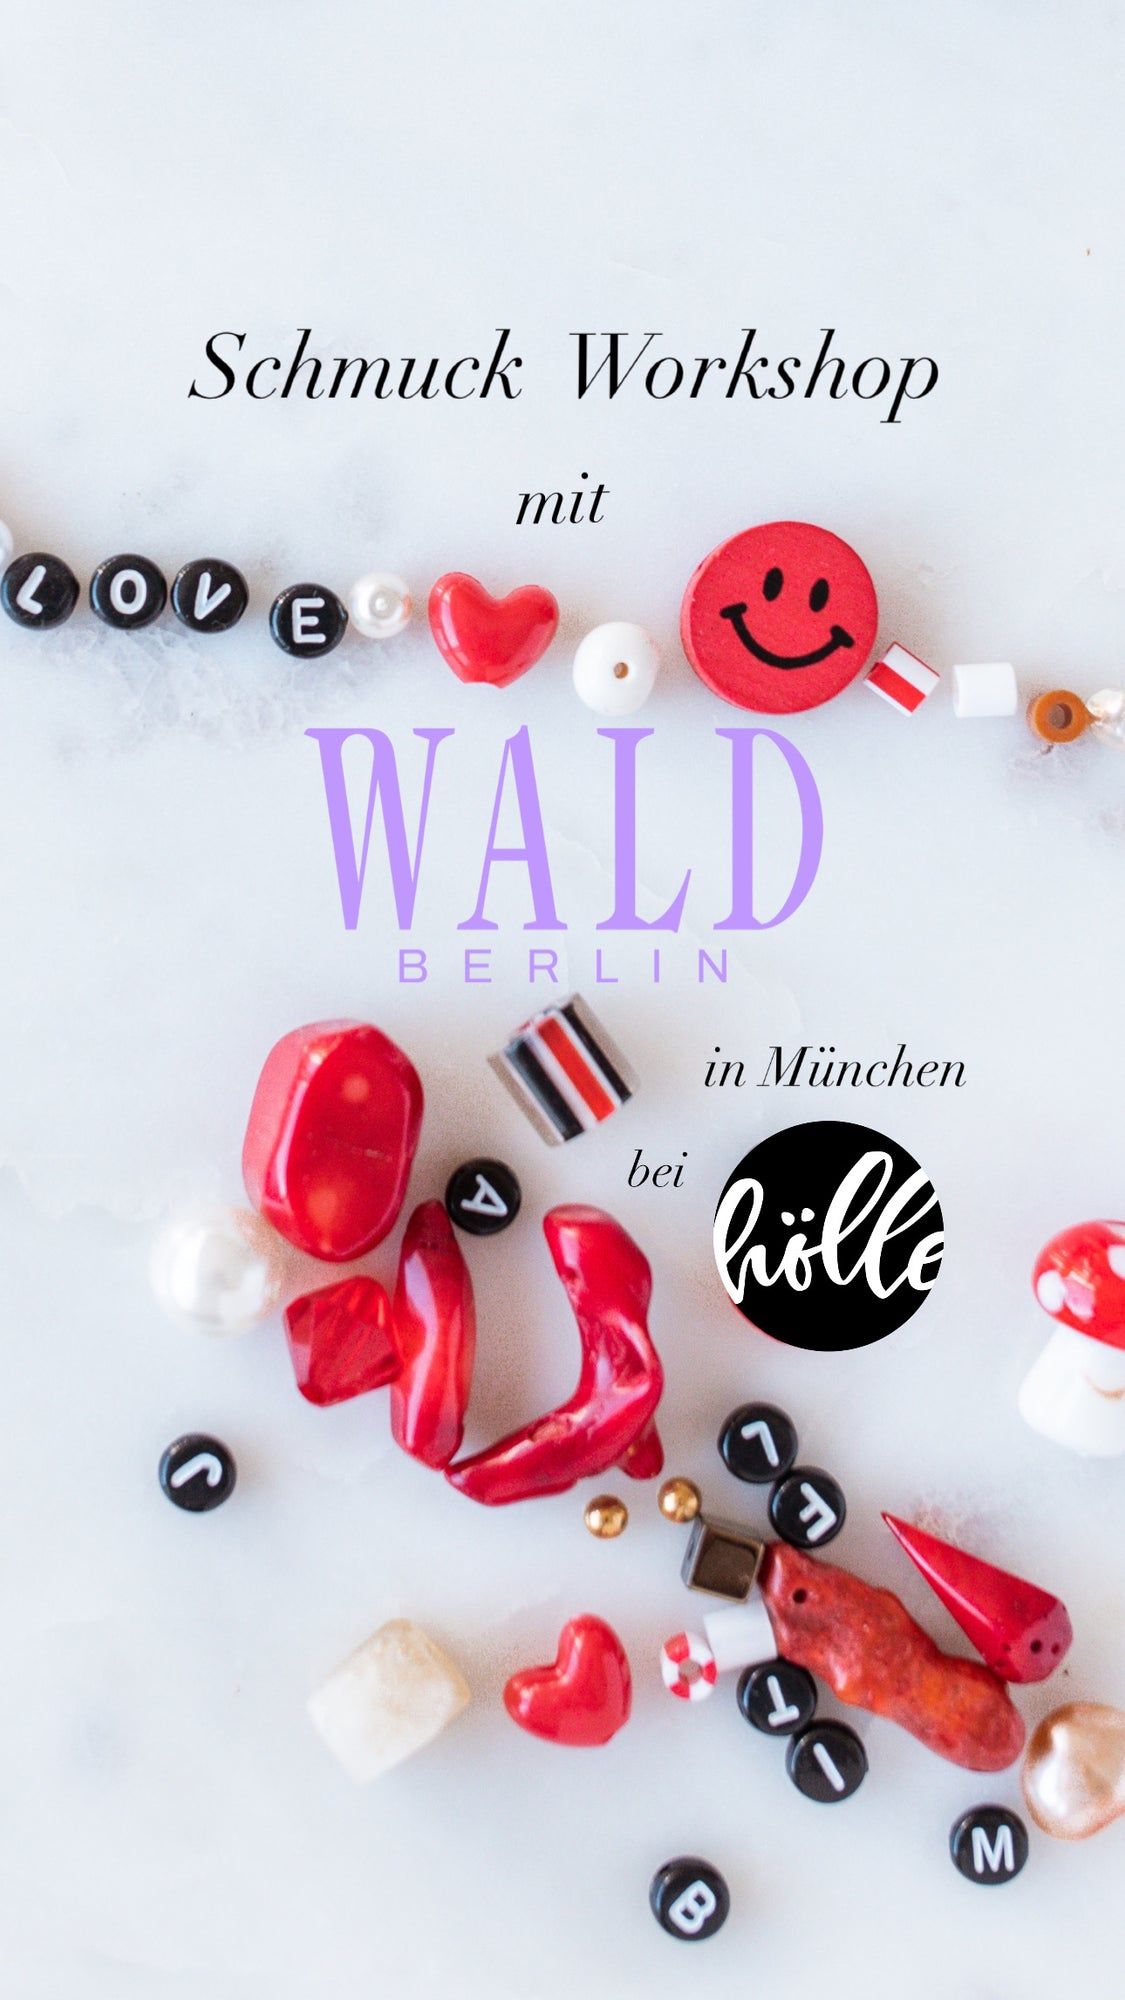 Promotional flyer for a WALD World DIY Schmuck-Workshop in München, featuring colorful beads and a smiley face.